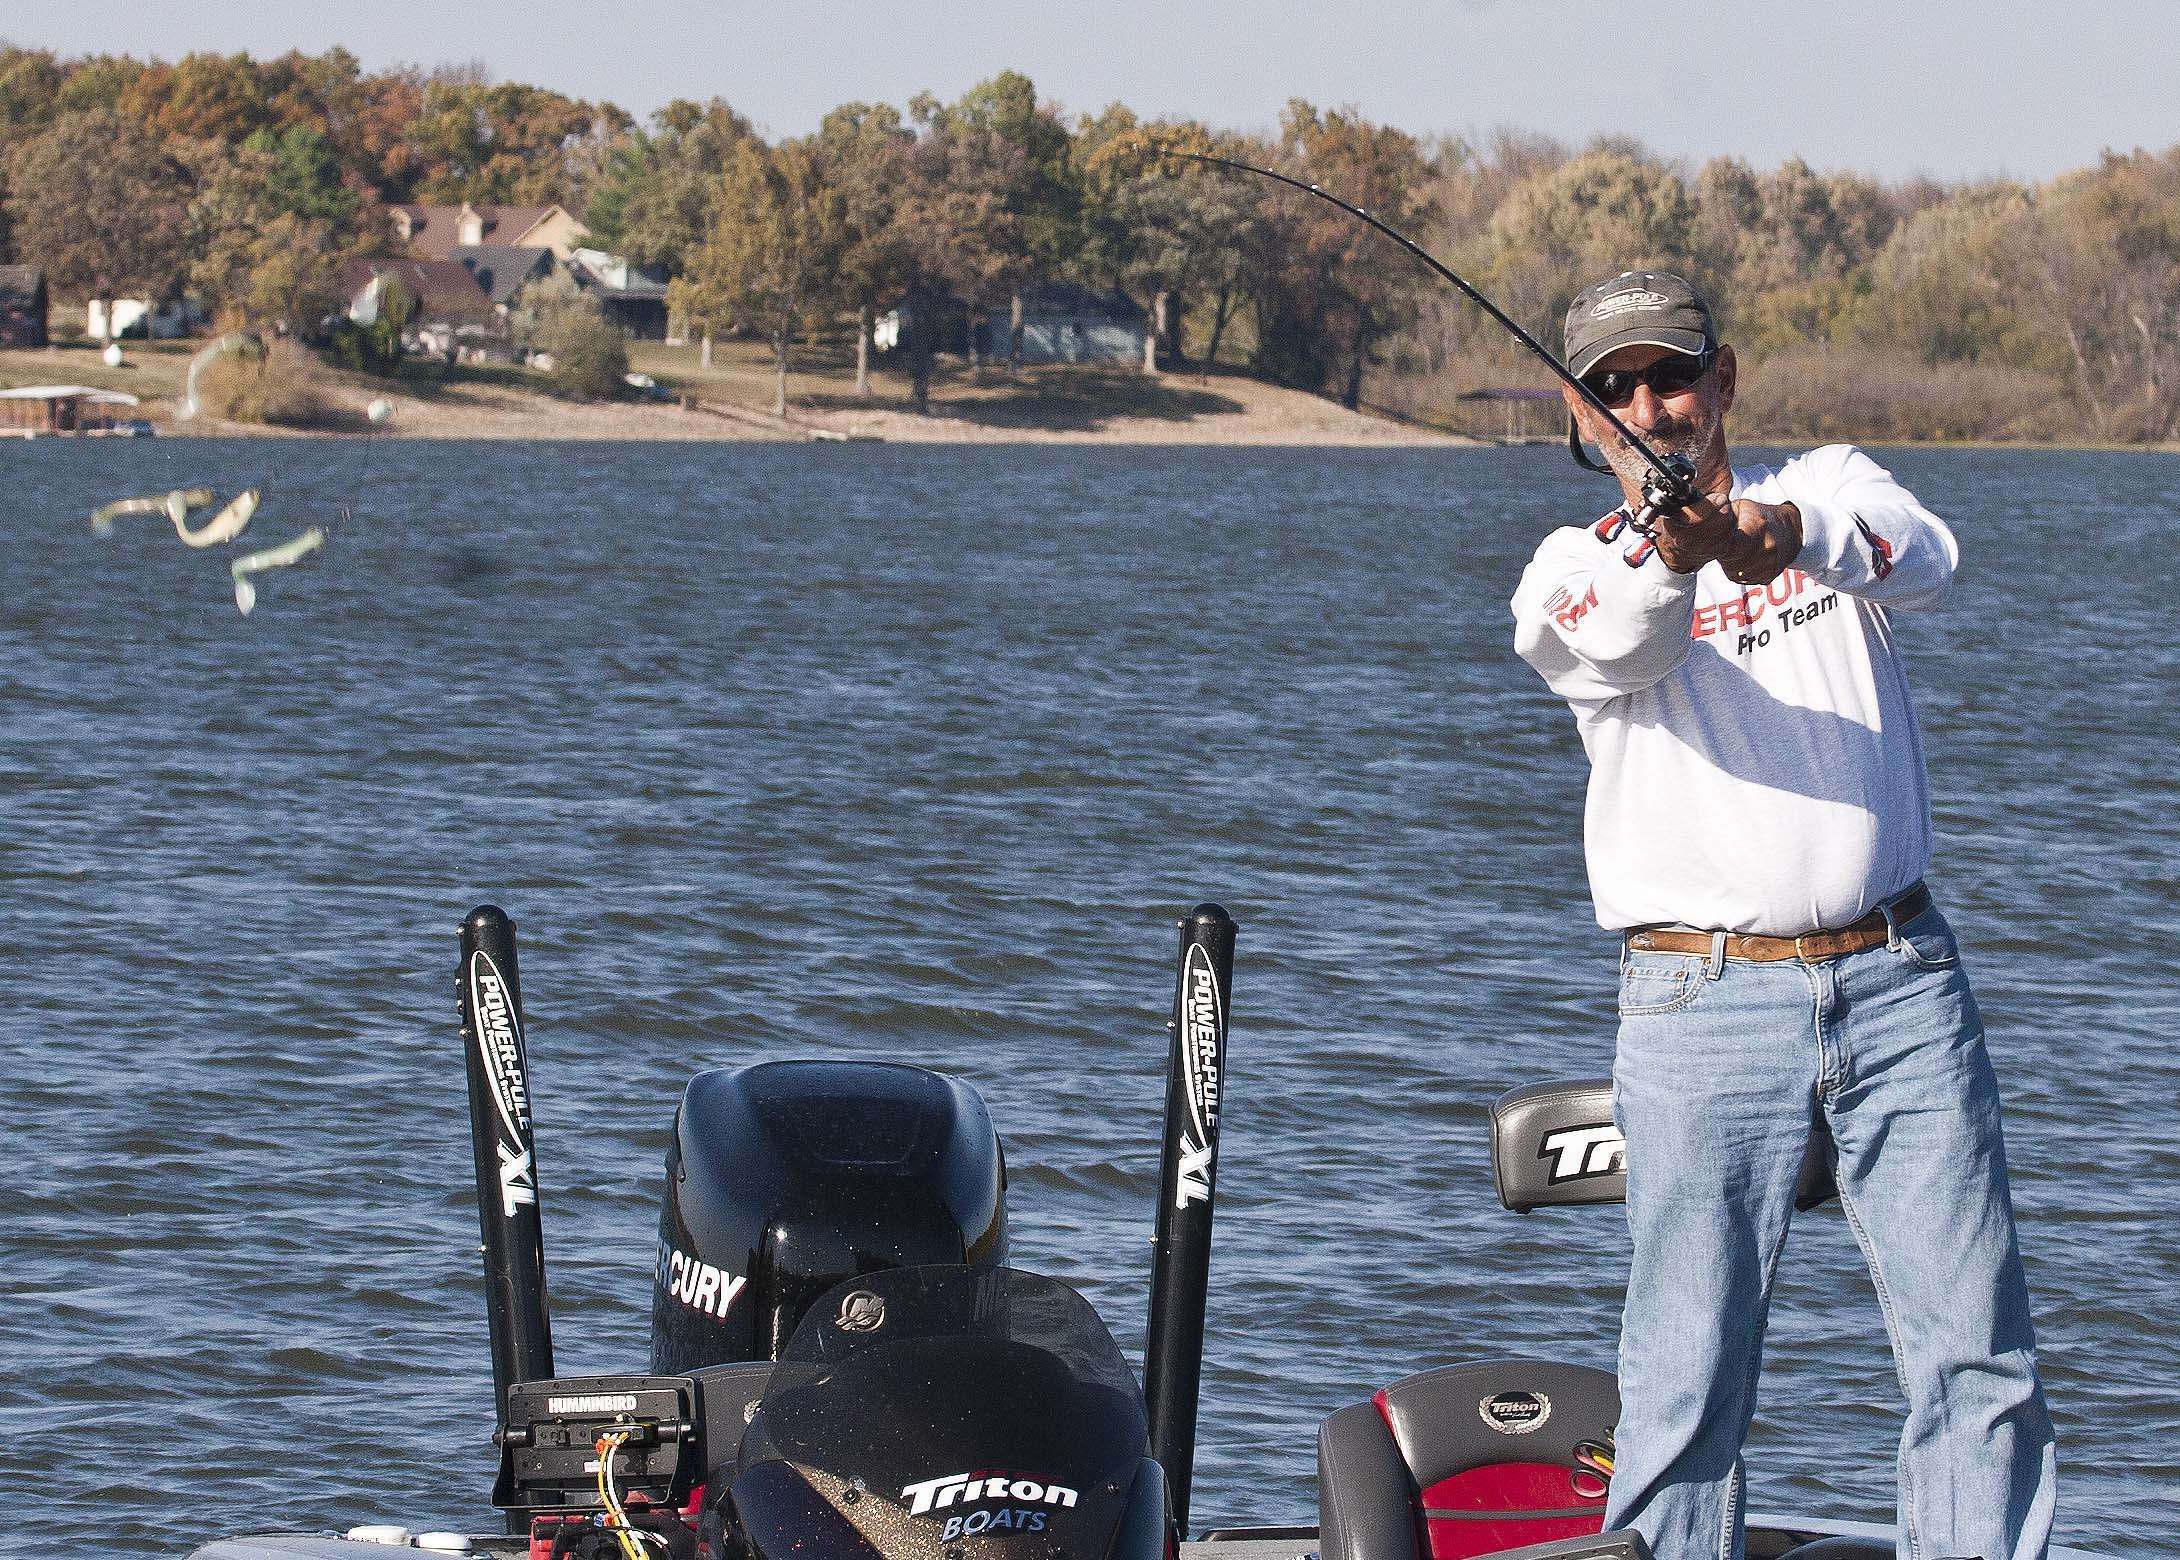 The Alabama Rig, which was imitated and marketed by numerous other companies under different names, had a major effect on the fishing world. But after several major tournaments turned into A-Rig slugfests, the technique was banned from B.A.S.S. competition in 2012 and FLW events in 2014. It remains an ultra-popular technique outside of those events.